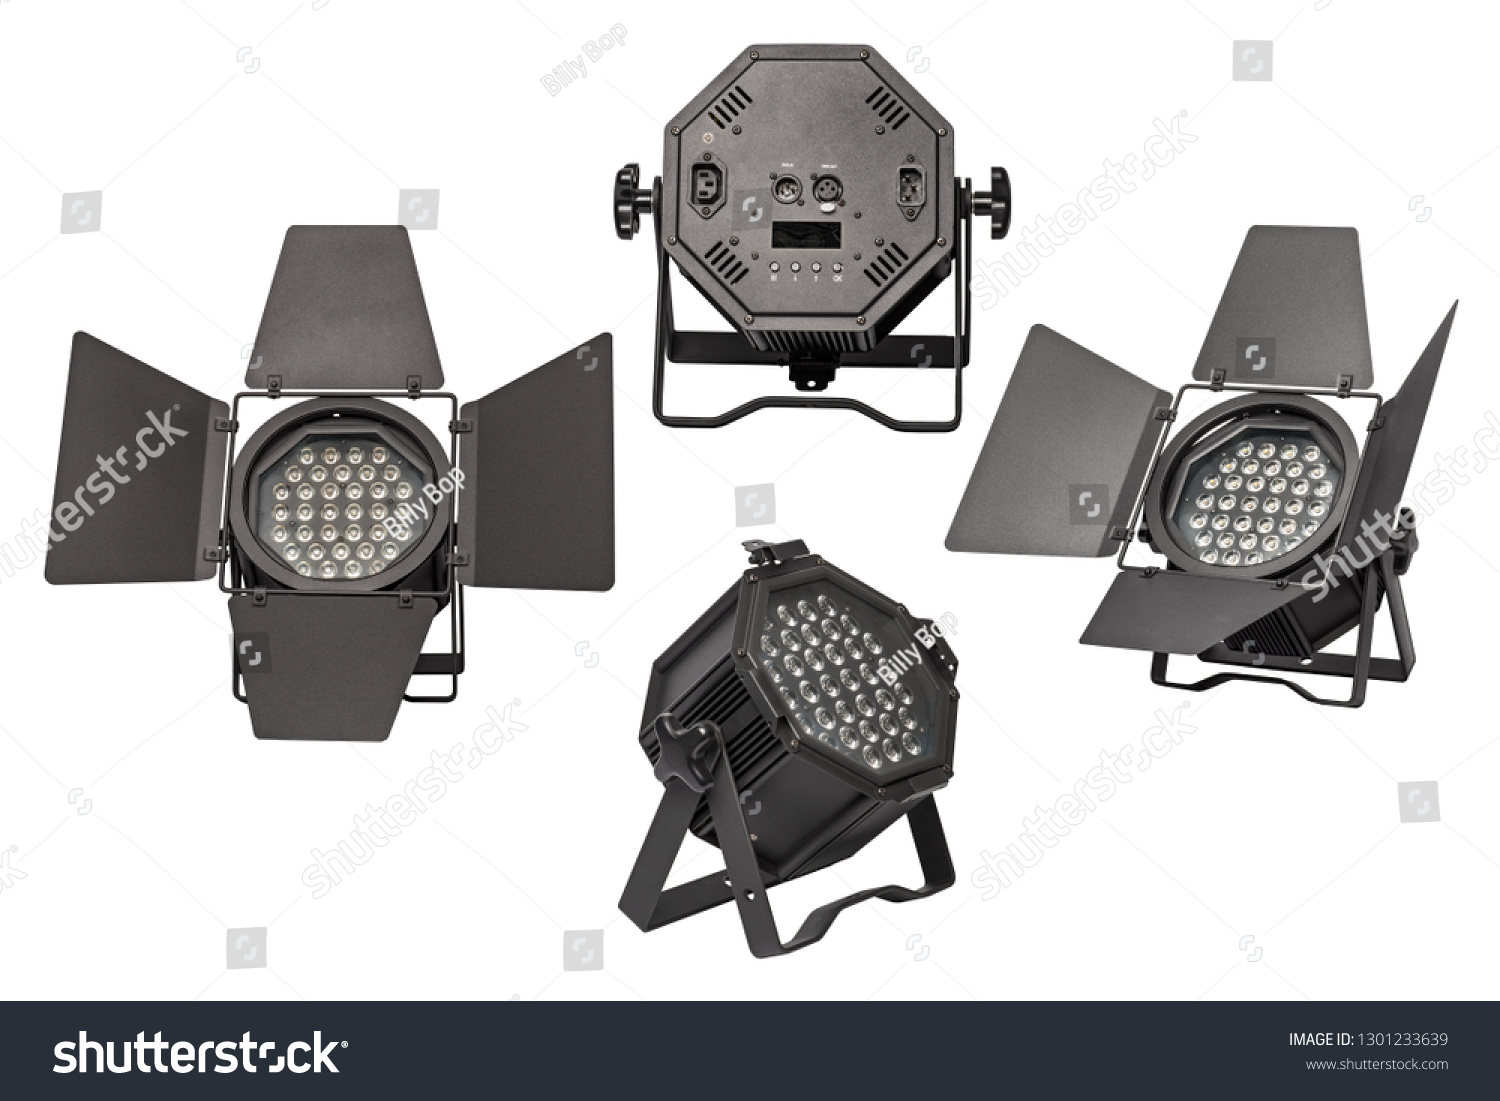 THEATRE STAGE SPOTLIGHT FOOTLIGHT. LED Theatre Spotlights Lamp Lights with Barn Doors. LED Theatre Stage Lighting. Concerts Video Film Studio Production Staging Lights. Isolated on white background #1301233639